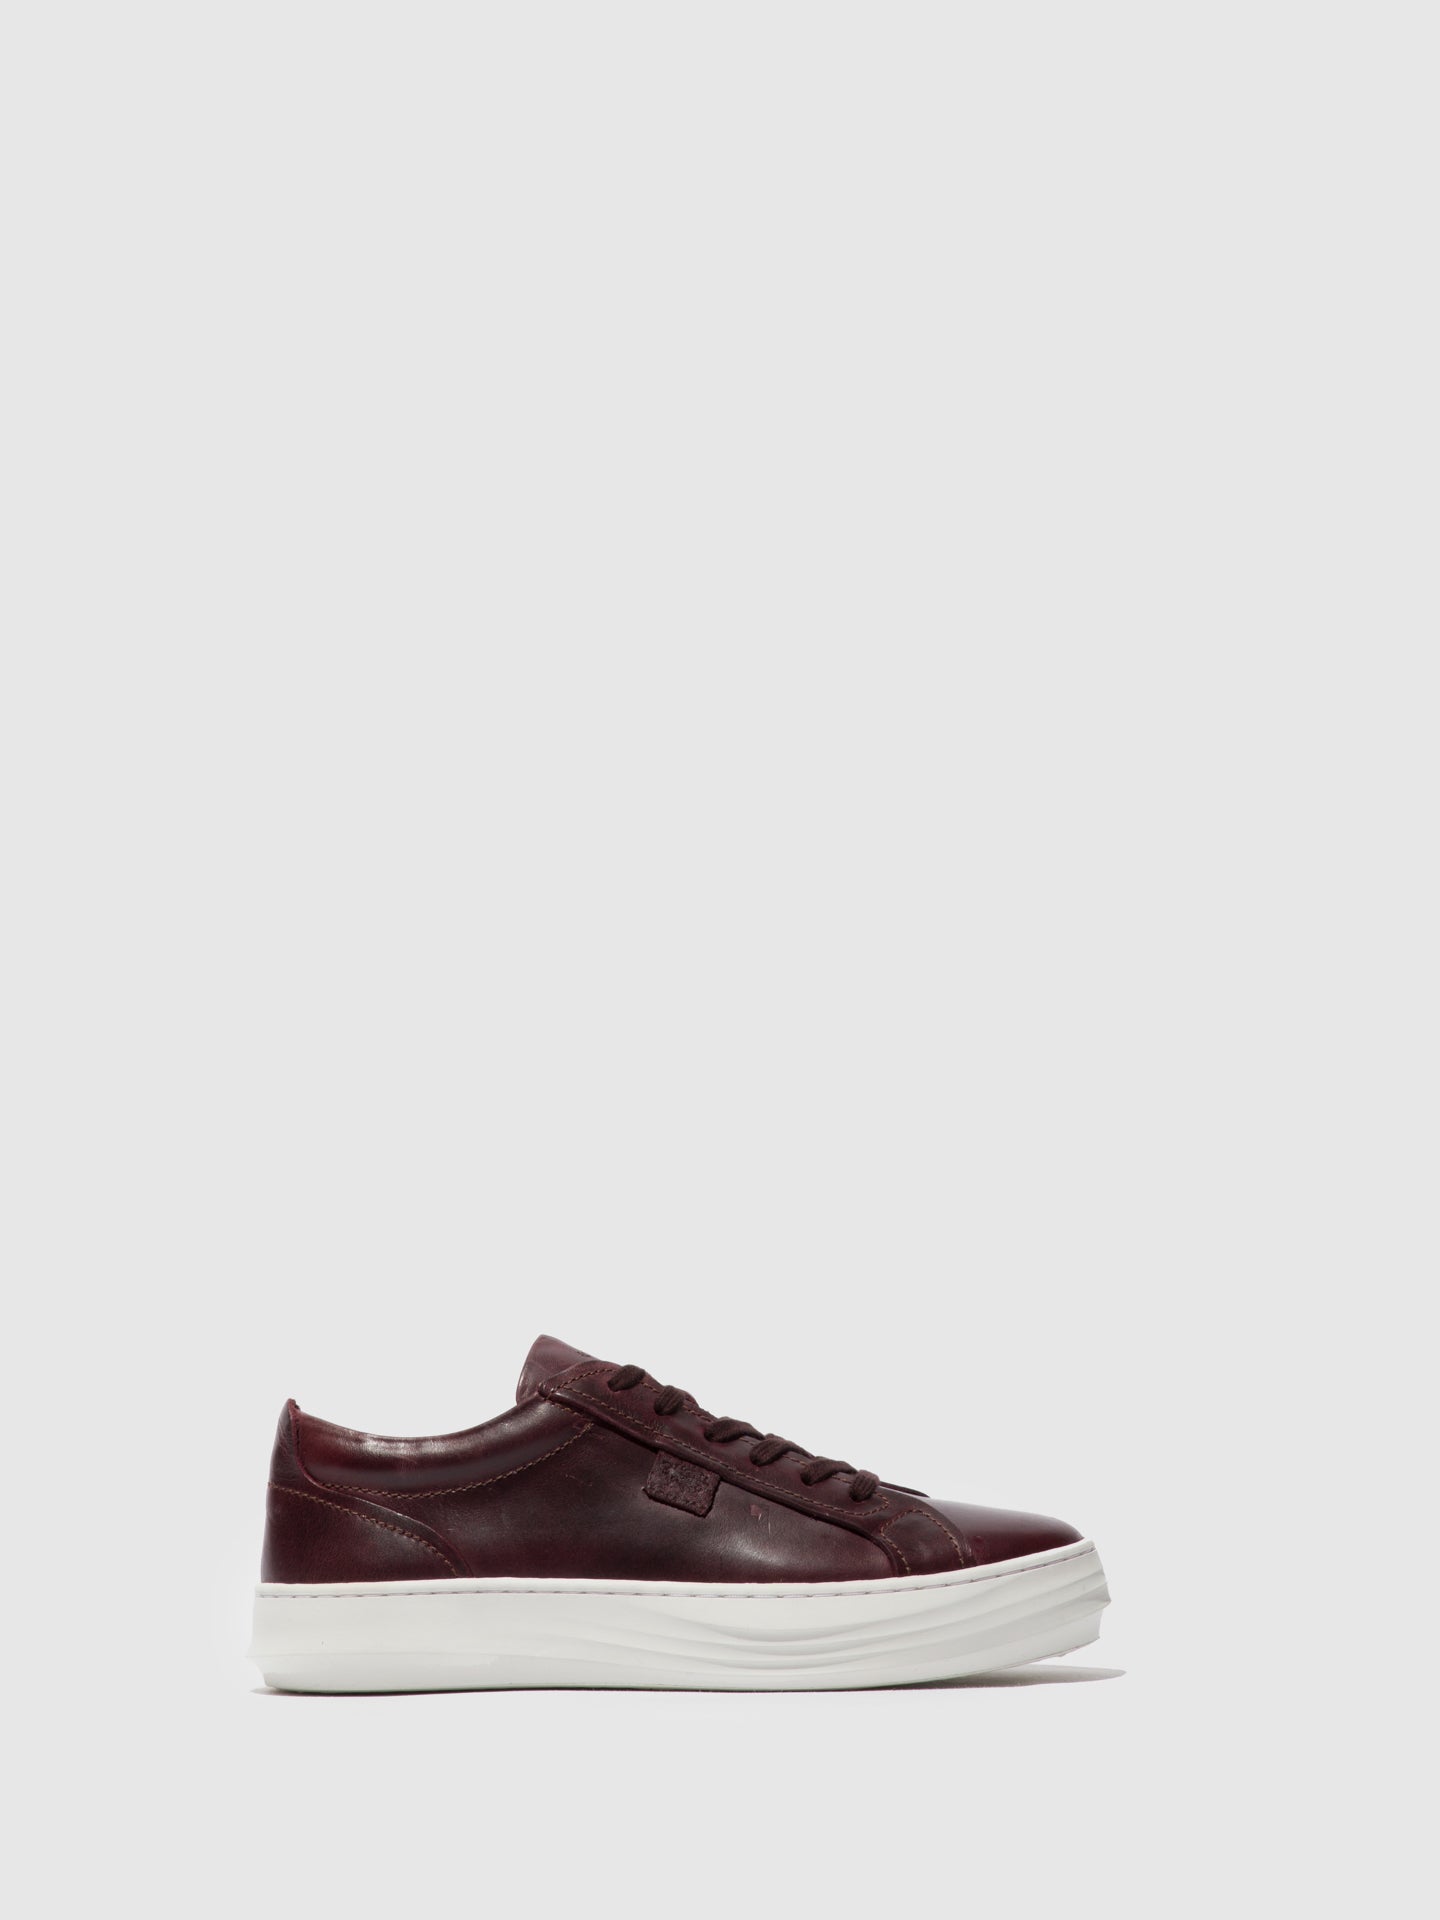 Fly London Lace-up Trainers CIVE424FLY RUG WINE